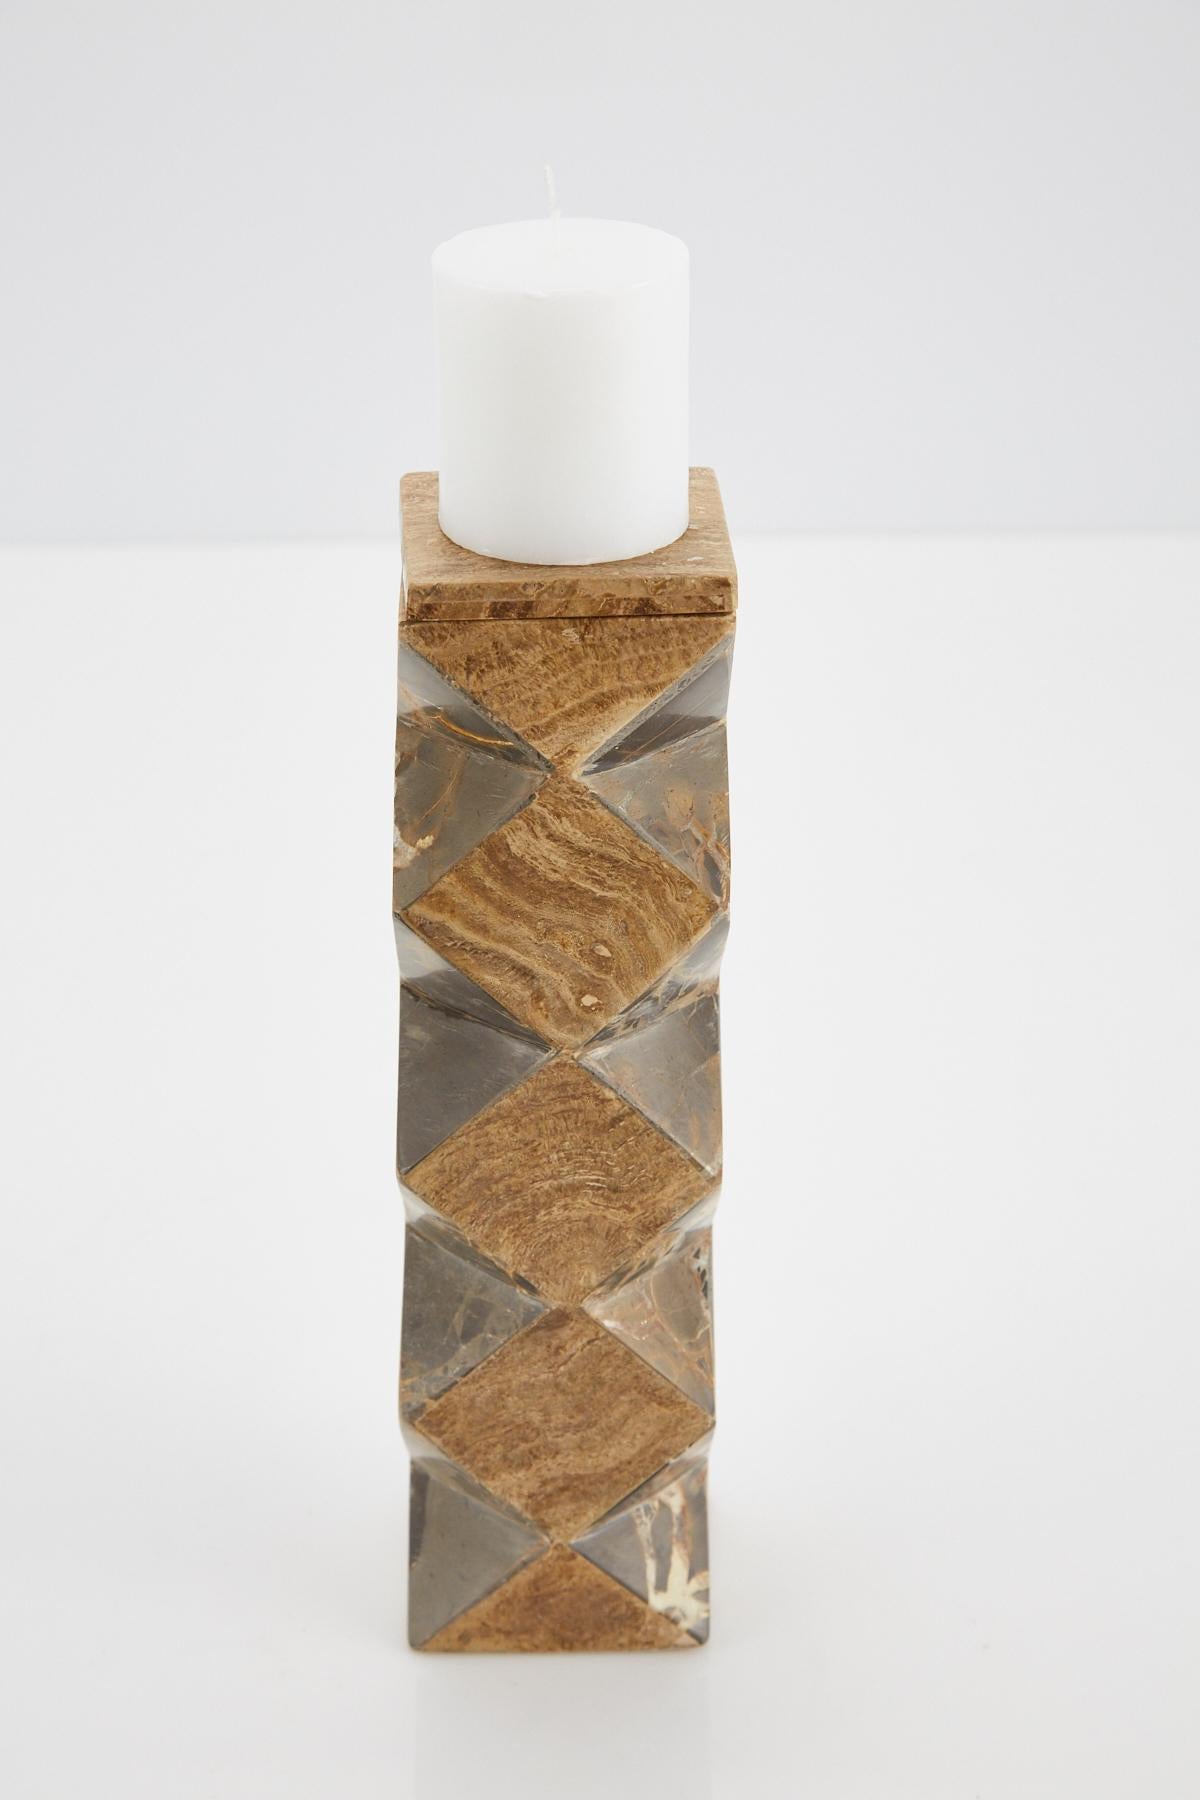 Post-Modern Convertible Faceted Postmodern Tessellated Stone Candlestick or Vase, 1990s For Sale